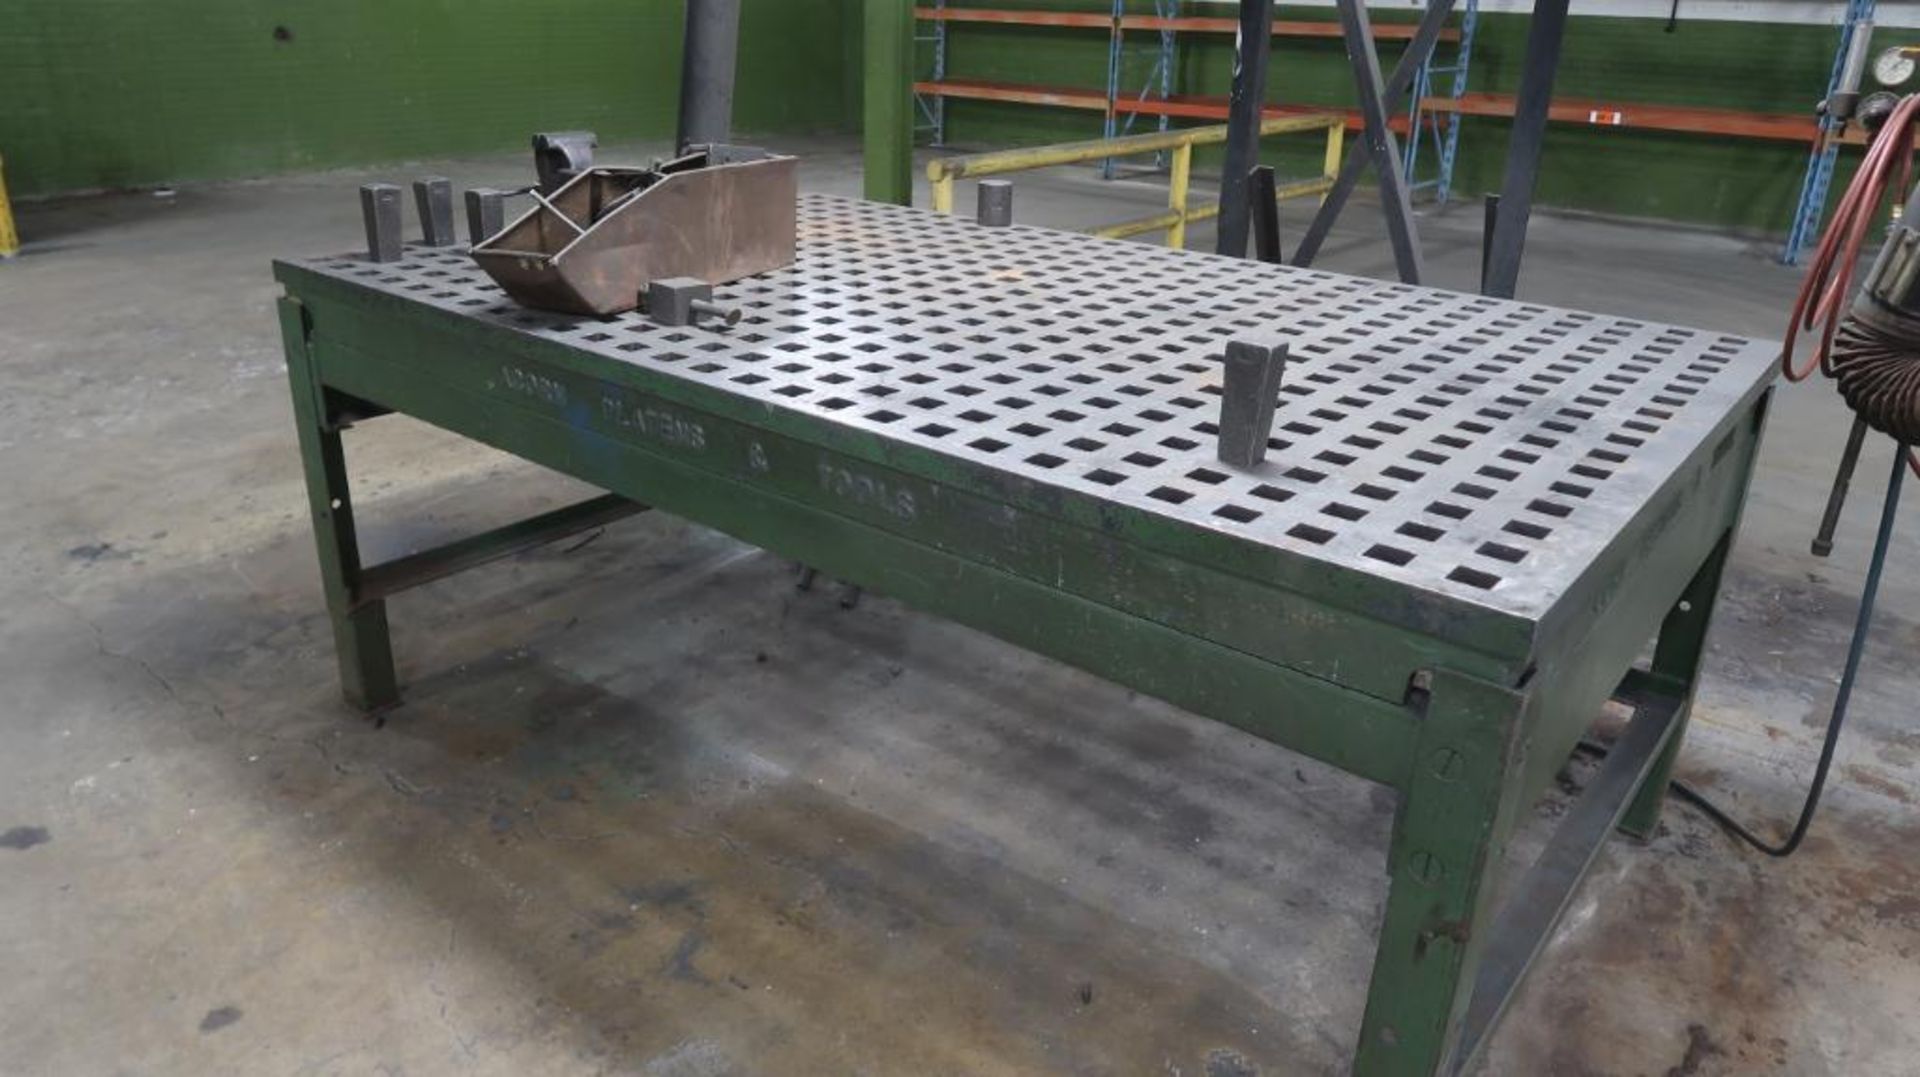 LOT: Acorn 60 in. x 96 in. Platen Table, Assorted Tools, Heavy Duty Stand, LOCATION: BAY 3